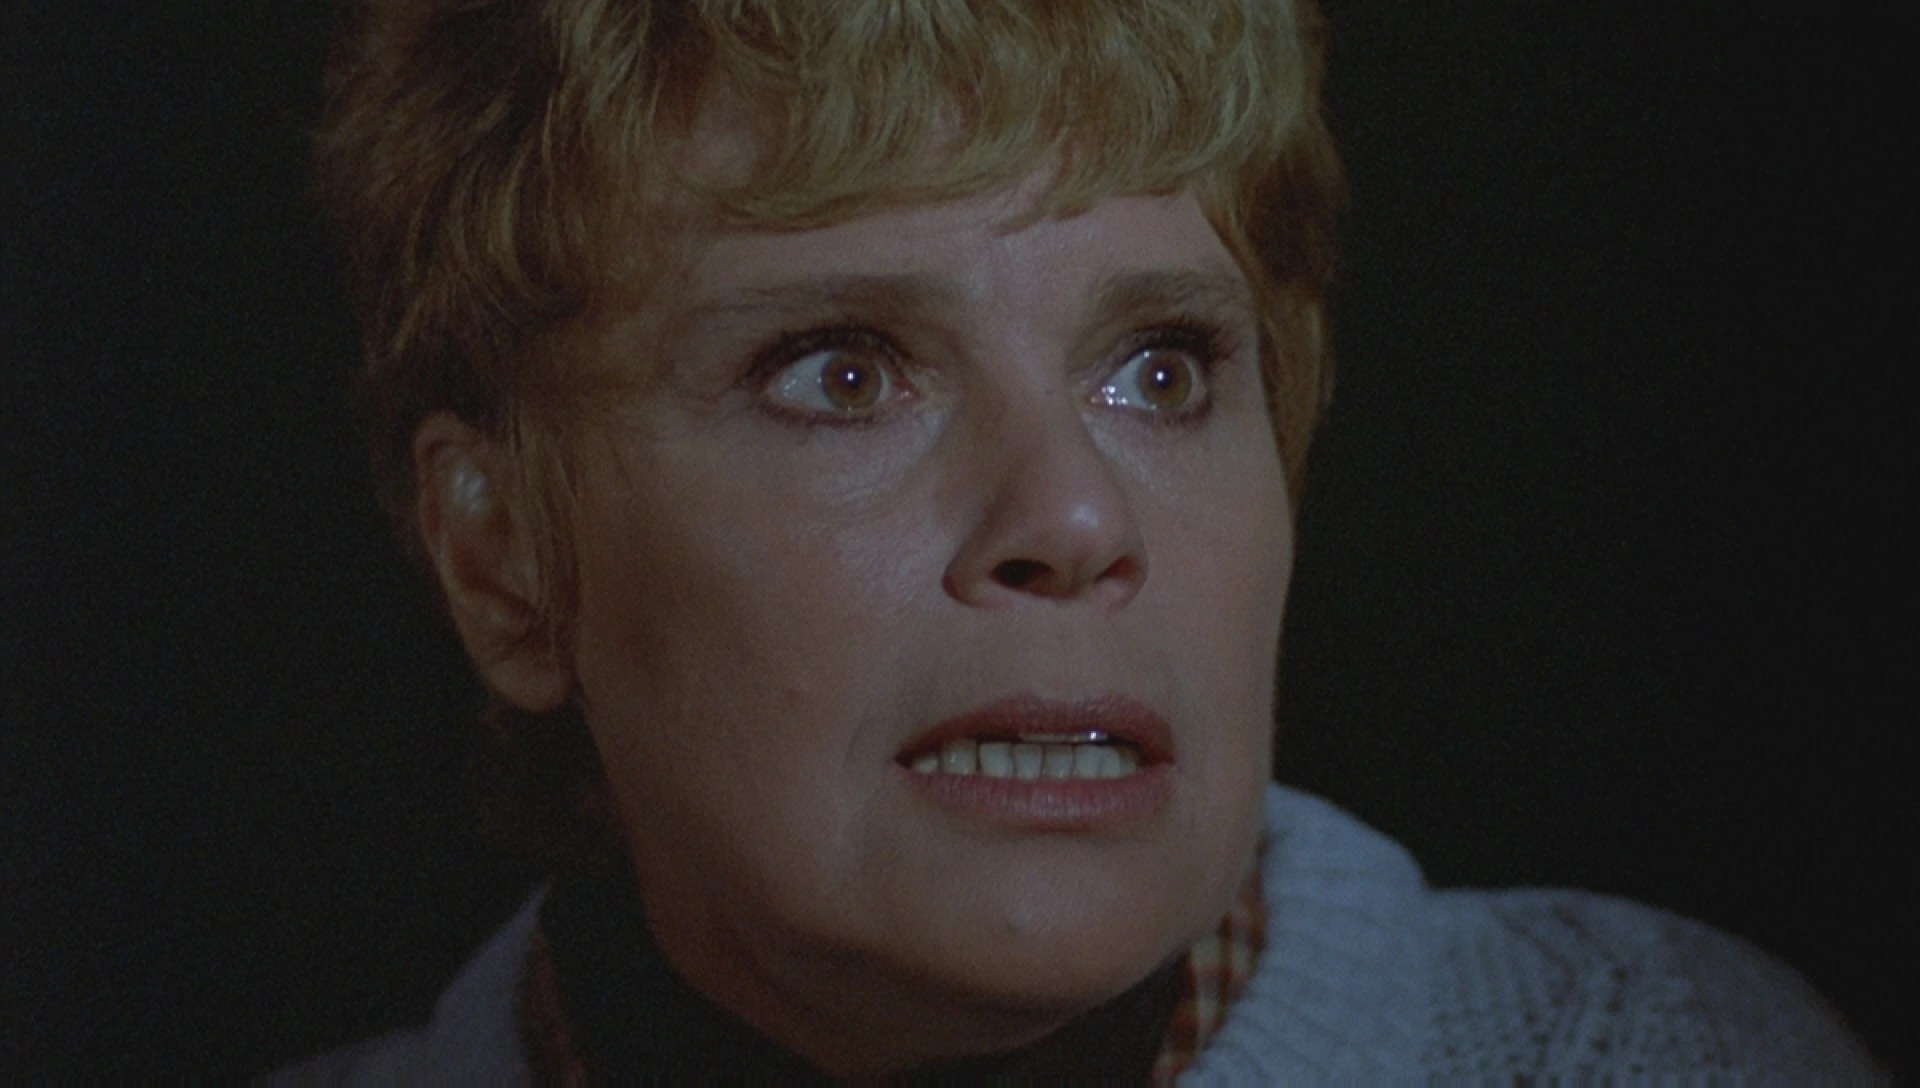 Pamela Voorhees being an icon in Friday the 13th